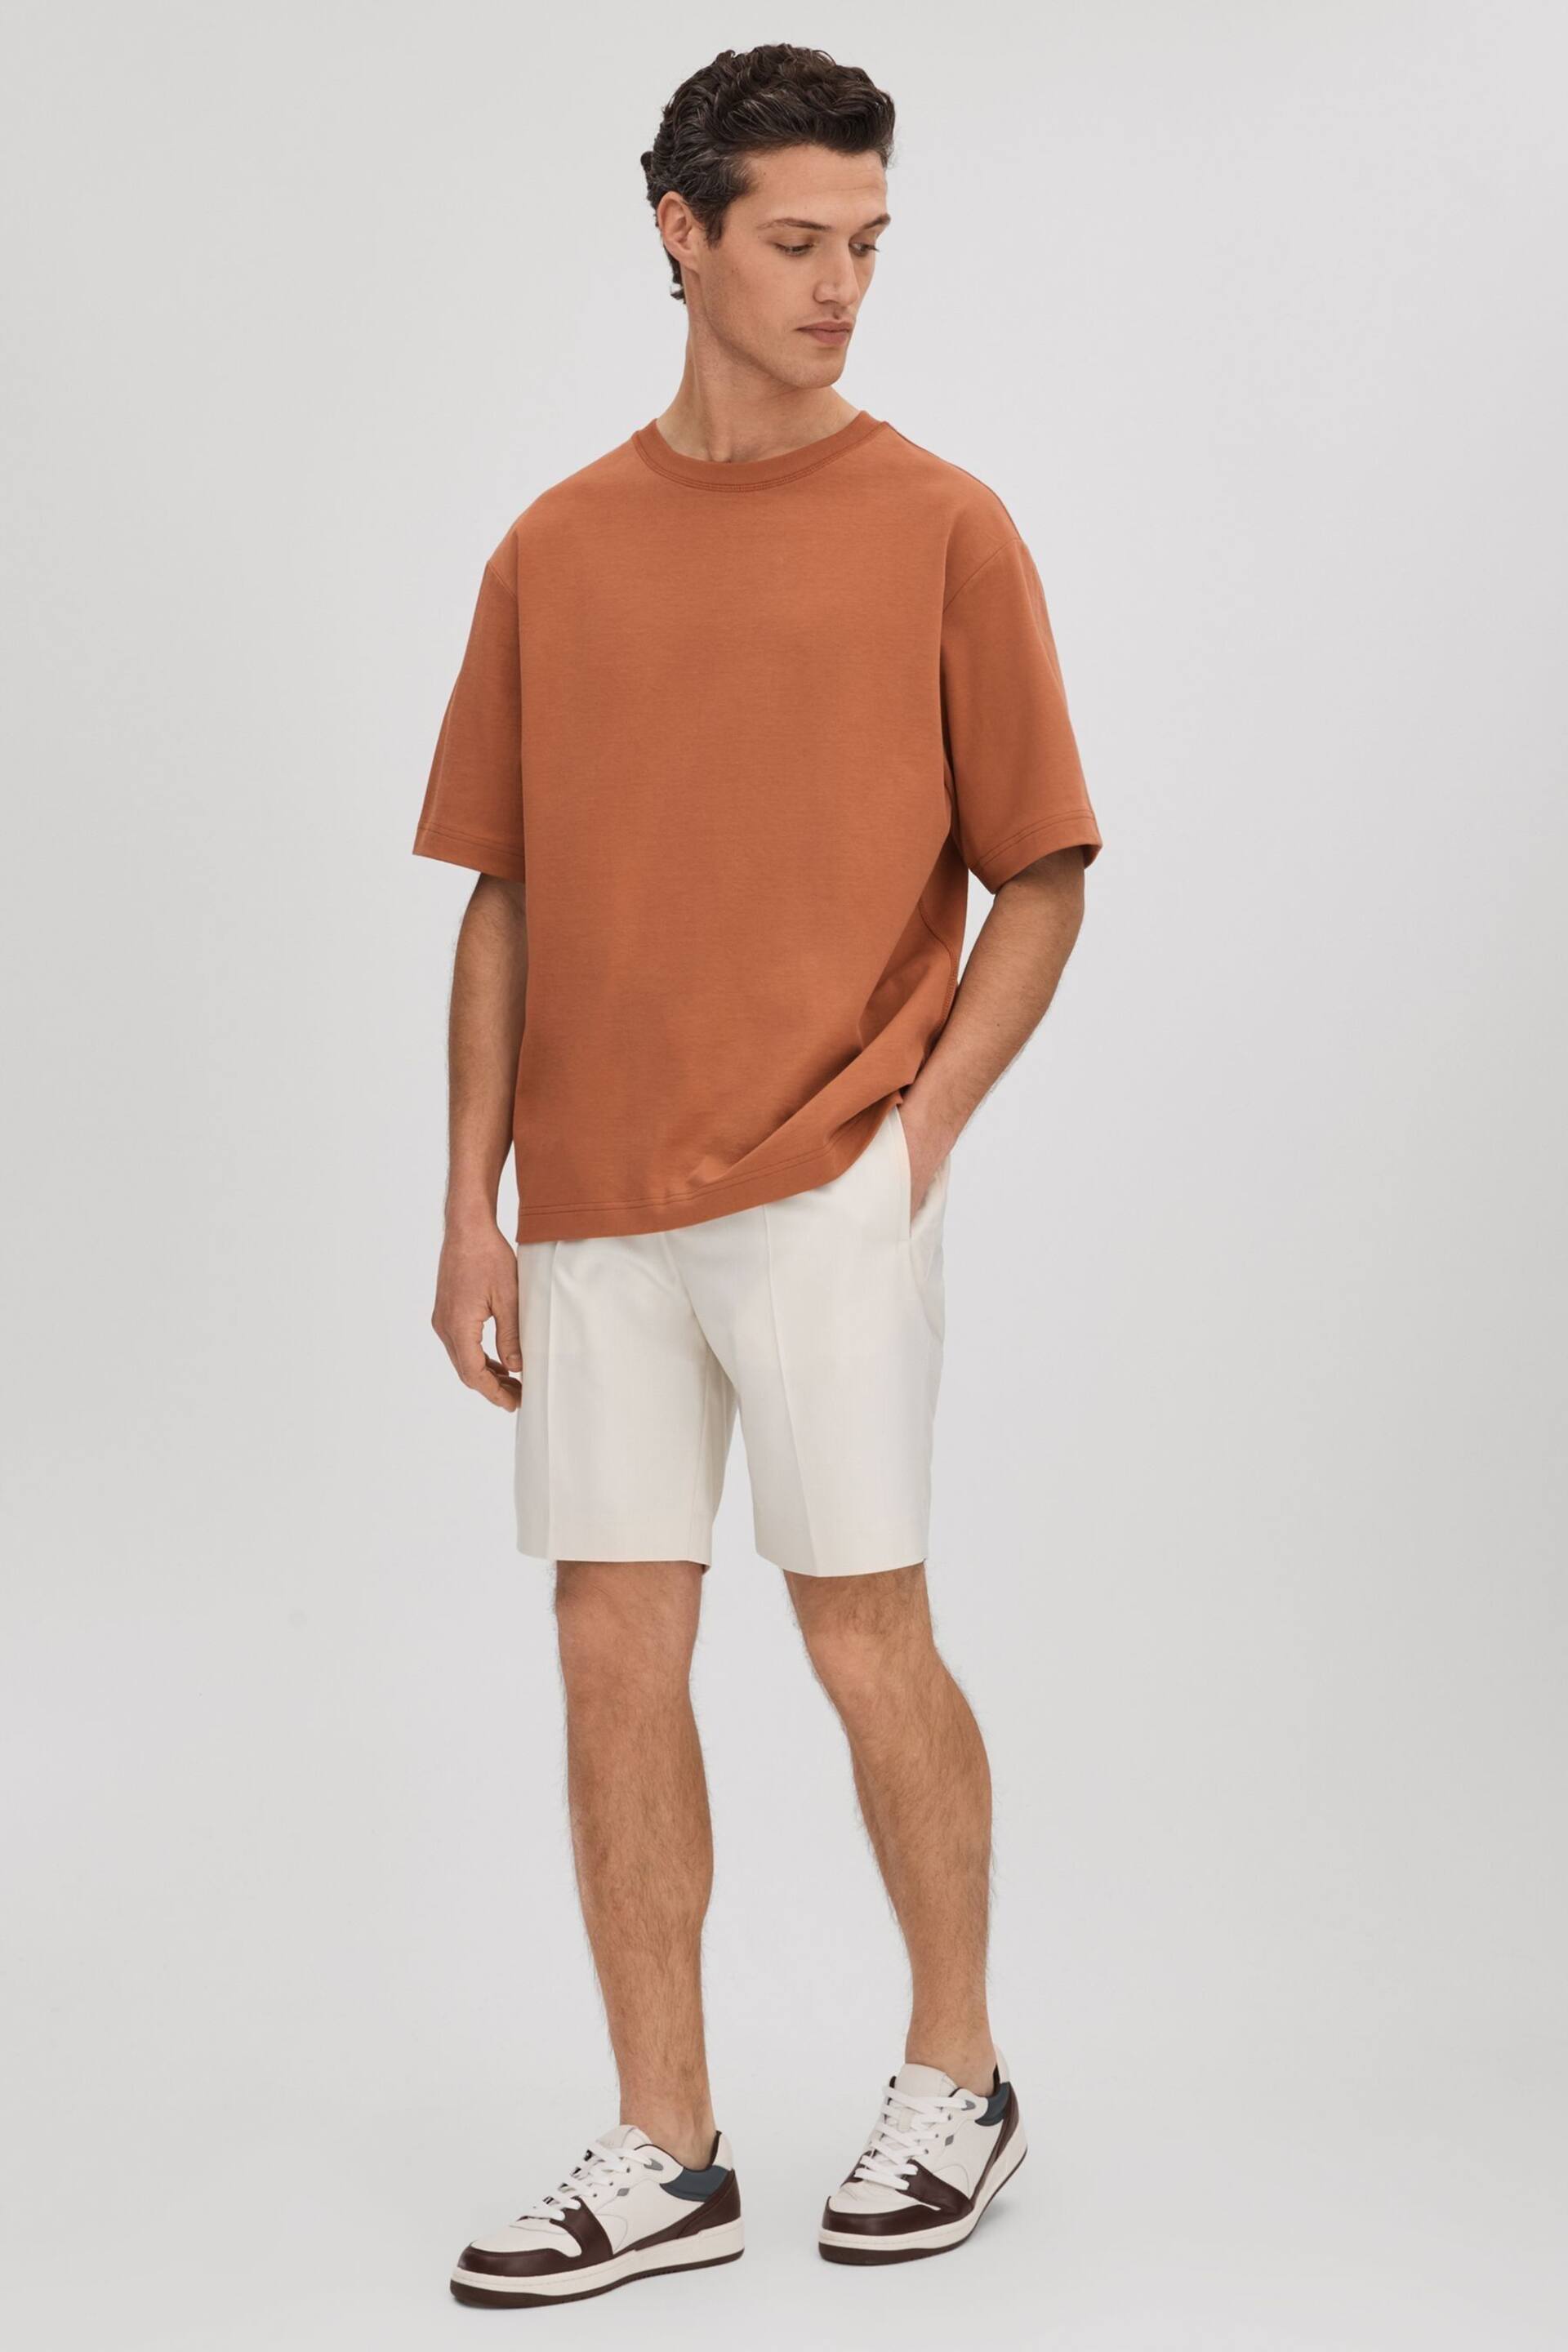 Reiss White Sussex Relaxed Drawstring Shorts - Image 3 of 6